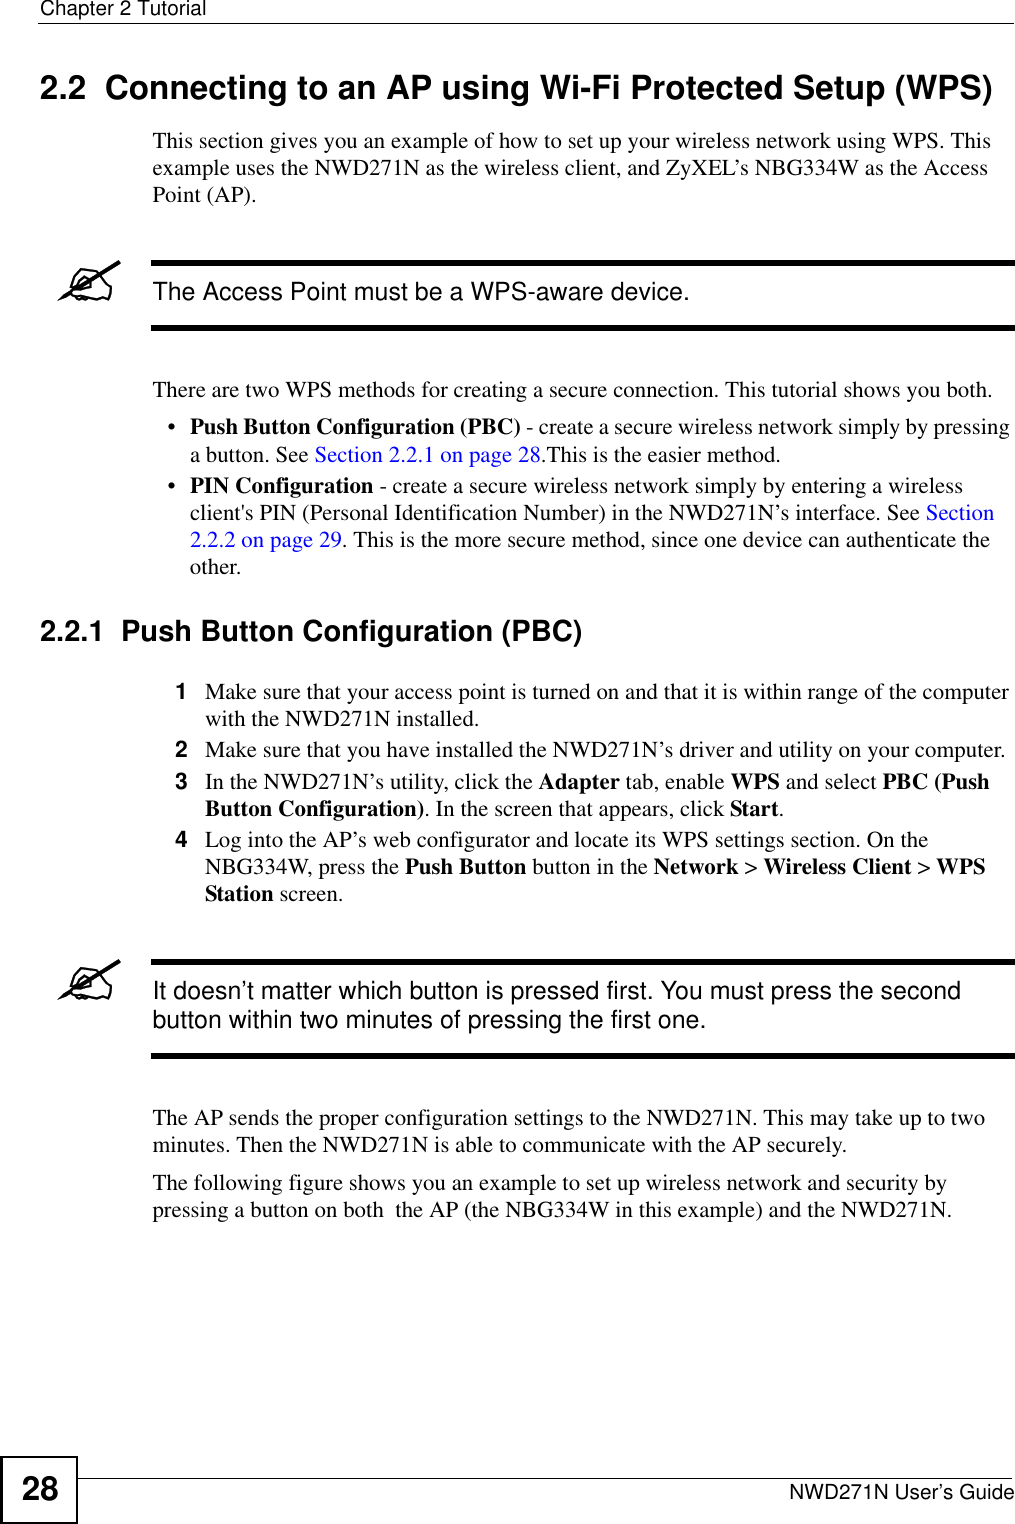 Chapter 2 TutorialNWD271N User’s Guide282.2  Connecting to an AP using Wi-Fi Protected Setup (WPS)This section gives you an example of how to set up your wireless network using WPS. This example uses the NWD271N as the wireless client, and ZyXEL’s NBG334W as the Access Point (AP). &quot;The Access Point must be a WPS-aware device.There are two WPS methods for creating a secure connection. This tutorial shows you both.•Push Button Configuration (PBC) - create a secure wireless network simply by pressing a button. See Section 2.2.1 on page 28.This is the easier method.•PIN Configuration - create a secure wireless network simply by entering a wireless client&apos;s PIN (Personal Identification Number) in the NWD271N’s interface. See Section 2.2.2 on page 29. This is the more secure method, since one device can authenticate the other.2.2.1  Push Button Configuration (PBC)1Make sure that your access point is turned on and that it is within range of the computer with the NWD271N installed. 2Make sure that you have installed the NWD271N’s driver and utility on your computer.3In the NWD271N’s utility, click the Adapter tab, enable WPS and select PBC (Push Button Configuration). In the screen that appears, click Start. 4Log into the AP’s web configurator and locate its WPS settings section. On the NBG334W, press the Push Button button in the Network &gt; Wireless Client &gt; WPS Station screen. &quot;It doesn’t matter which button is pressed first. You must press the second button within two minutes of pressing the first one. The AP sends the proper configuration settings to the NWD271N. This may take up to two minutes. Then the NWD271N is able to communicate with the AP securely. The following figure shows you an example to set up wireless network and security by pressing a button on both  the AP (the NBG334W in this example) and the NWD271N.